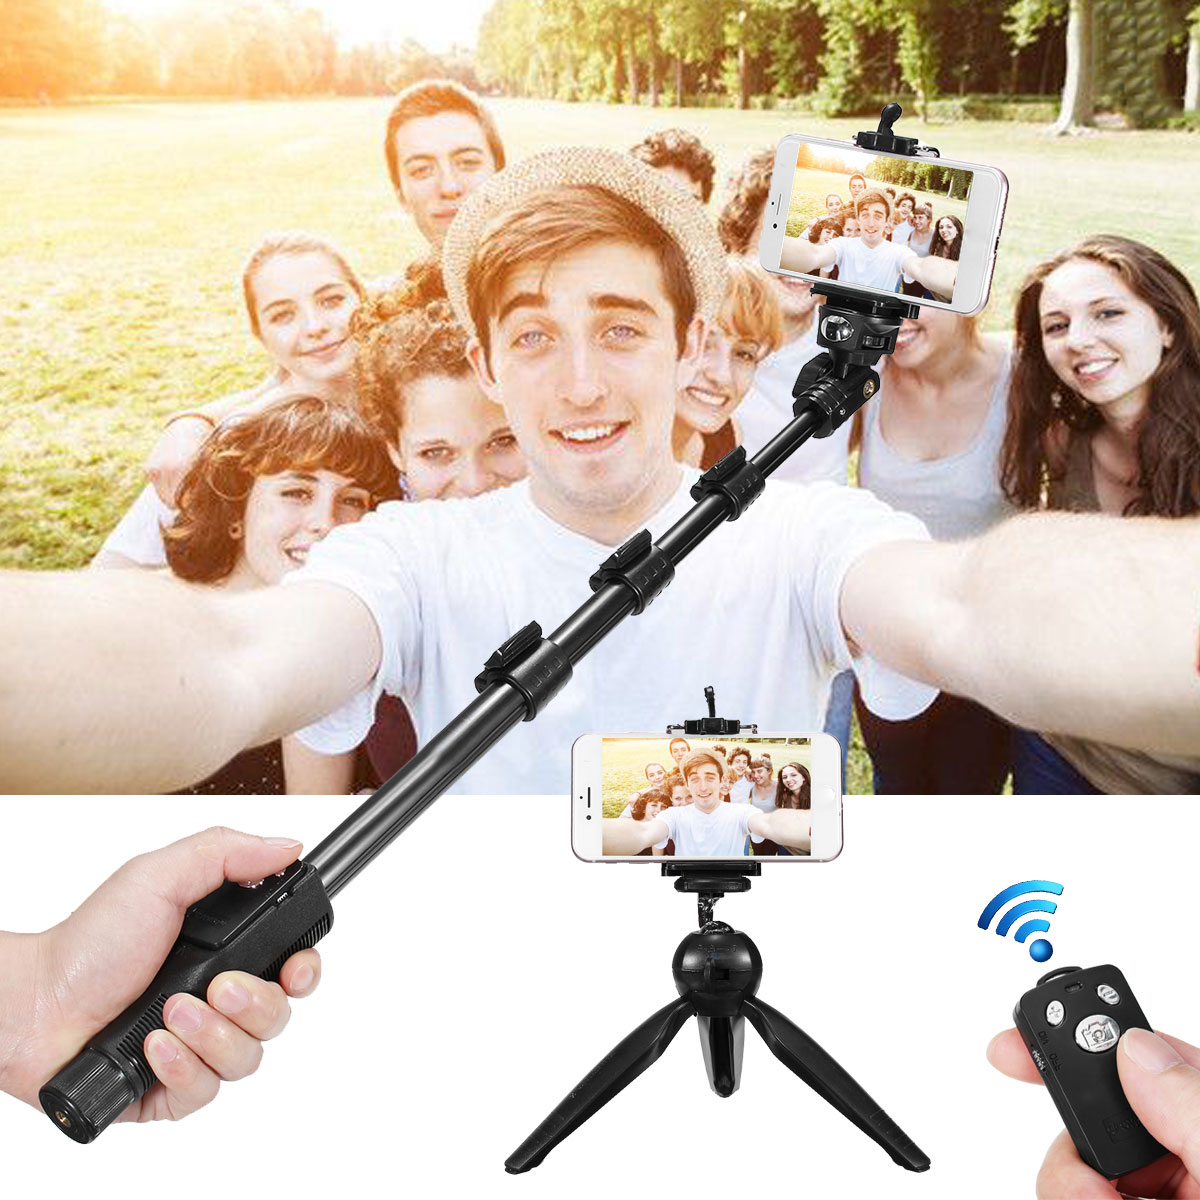 bluetooth Wireless Remote Control Extendable Handheld Selfie Stick Monopod + Tripod for Camera Mobile Phones